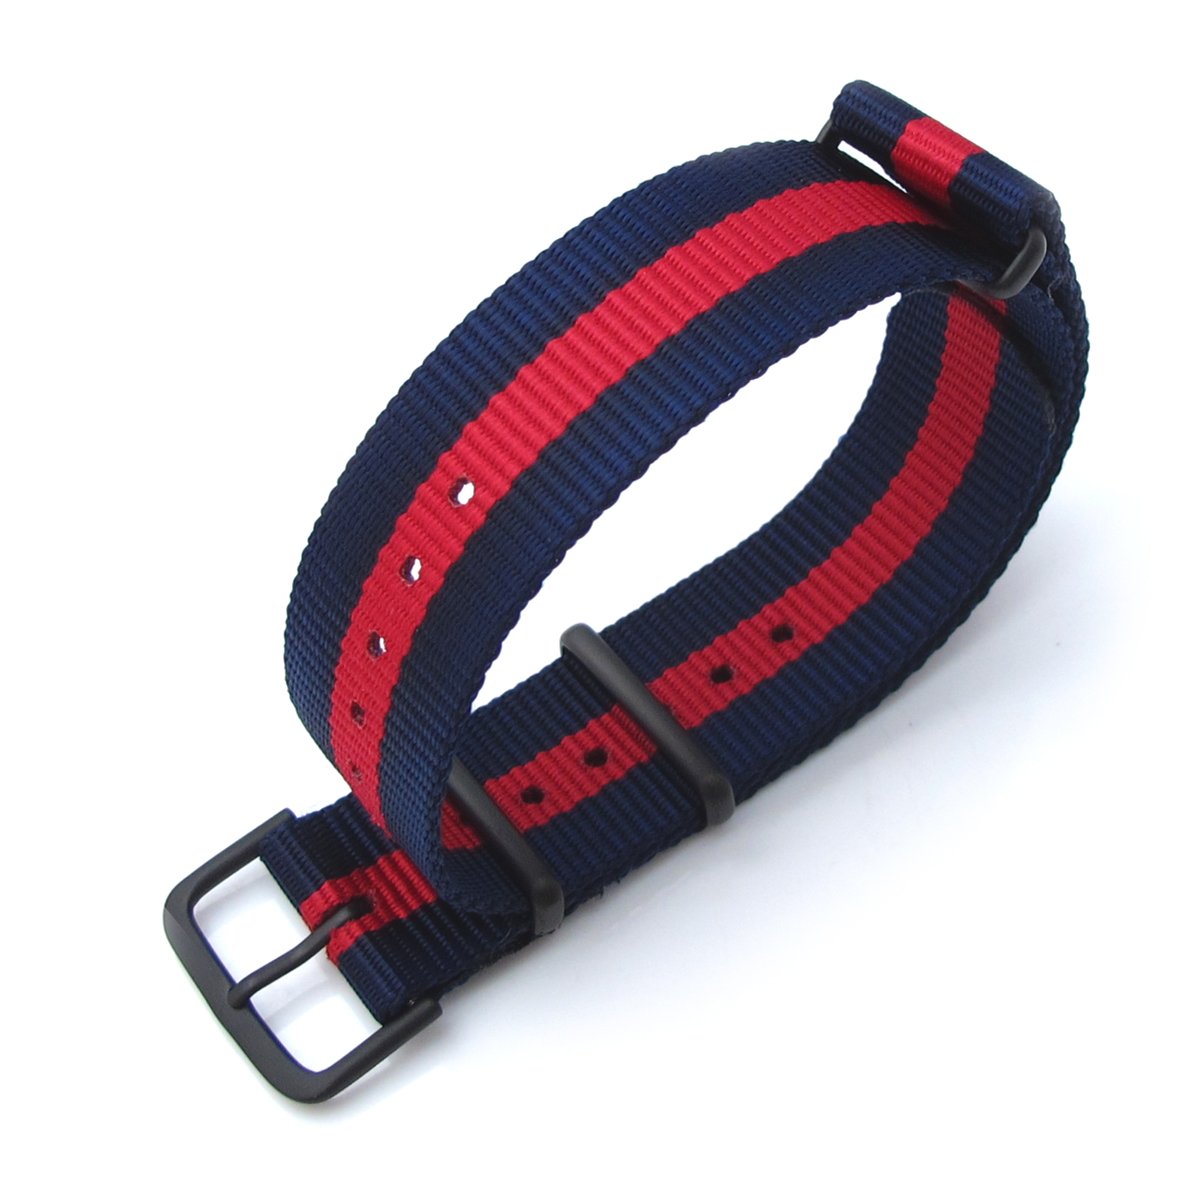 MiLTAT 20mm G10 military watch strap ballistic nylon armband PVD Red & Blue Stripes Strapcode Watch Bands